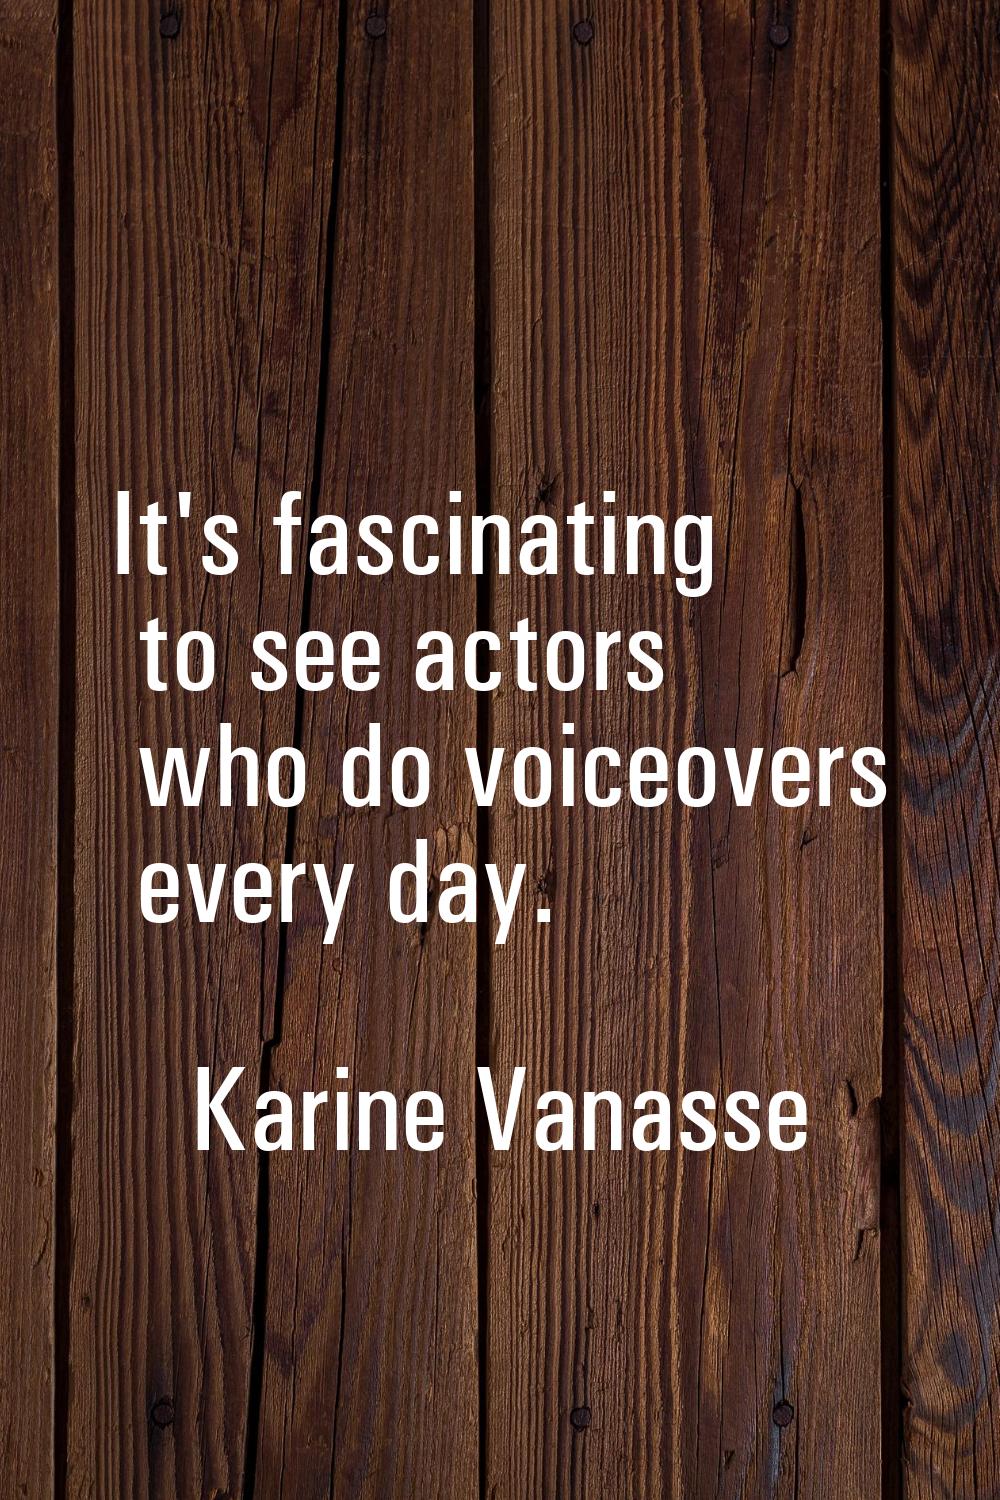 It's fascinating to see actors who do voiceovers every day.